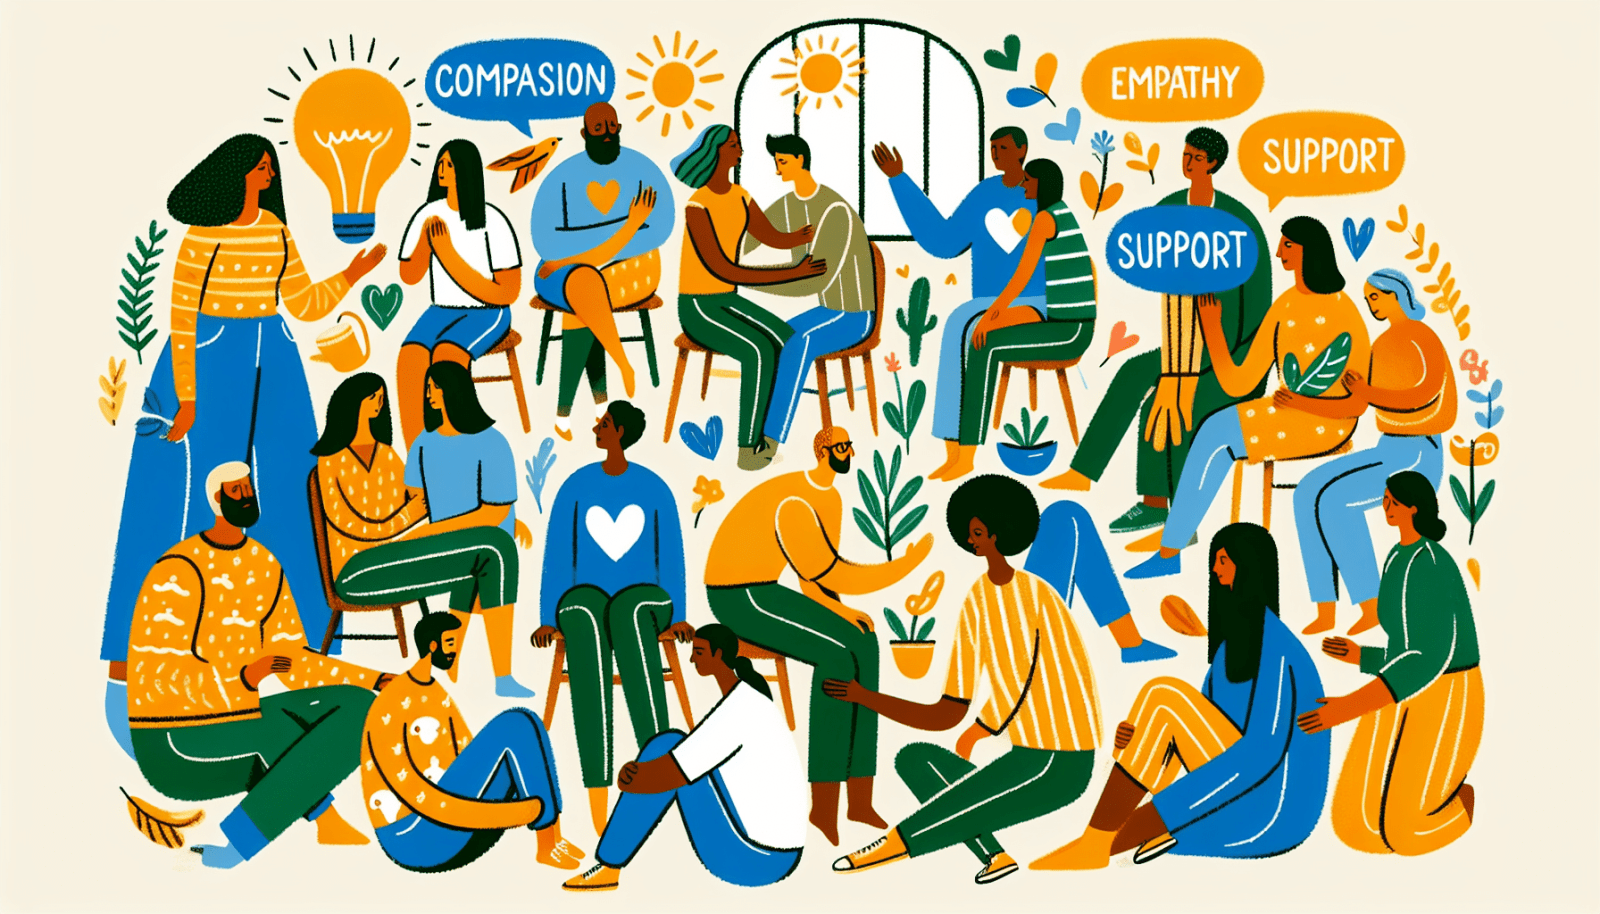 Illustration of diverse people engaged in supportive and compassionate interactions with plants and abstract elements, with text bubbles containing the words "compassion," "empathy," and "support."